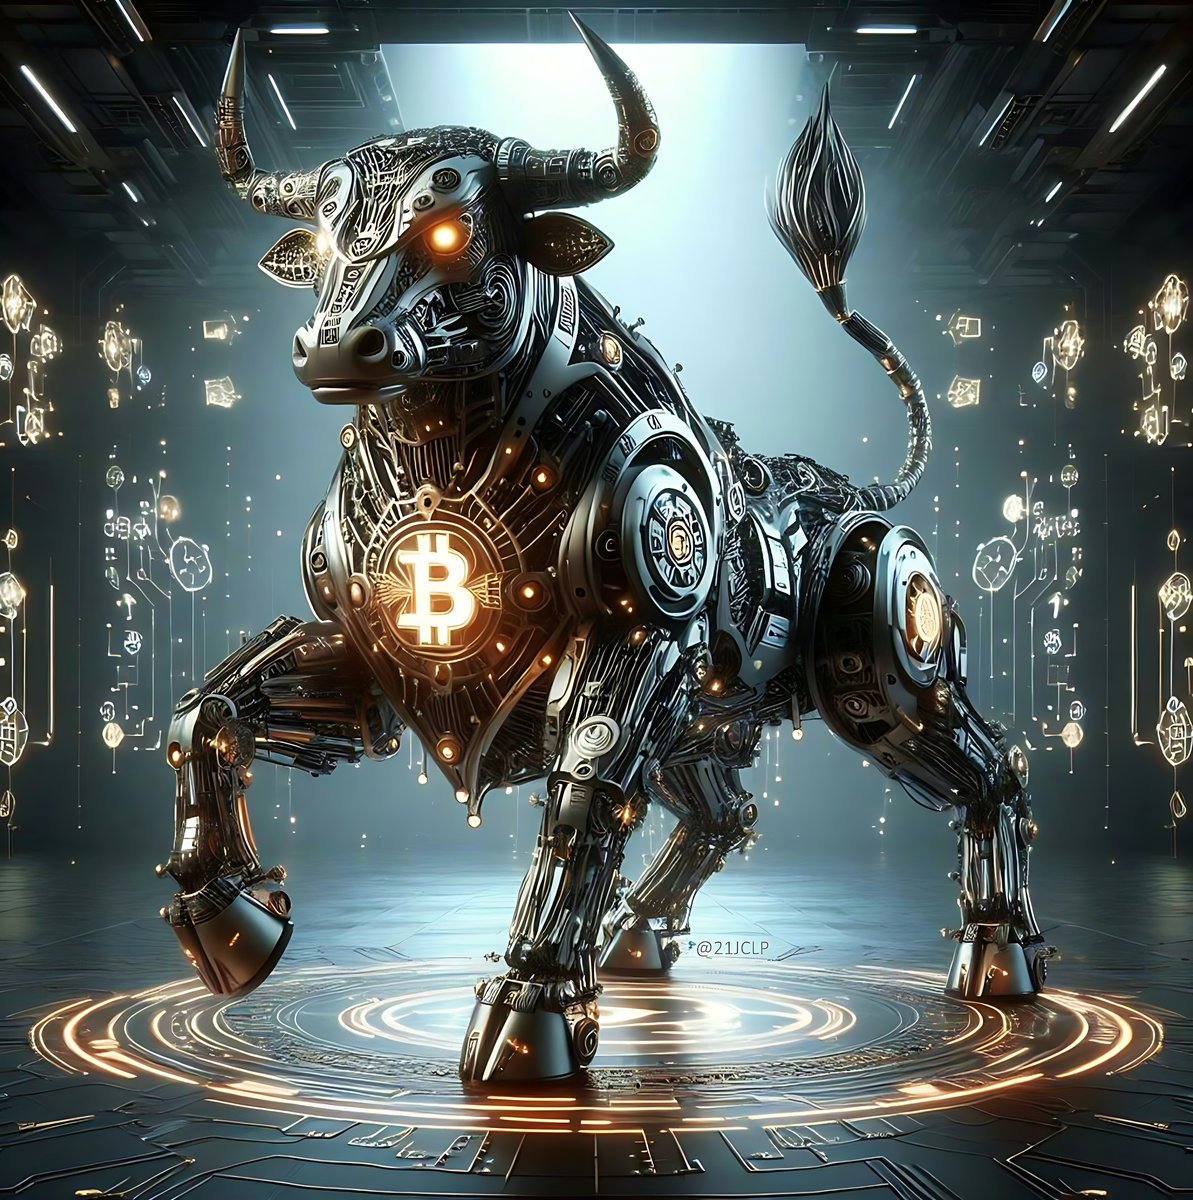 There's a Bull in Cyberspace. #Bitcoin